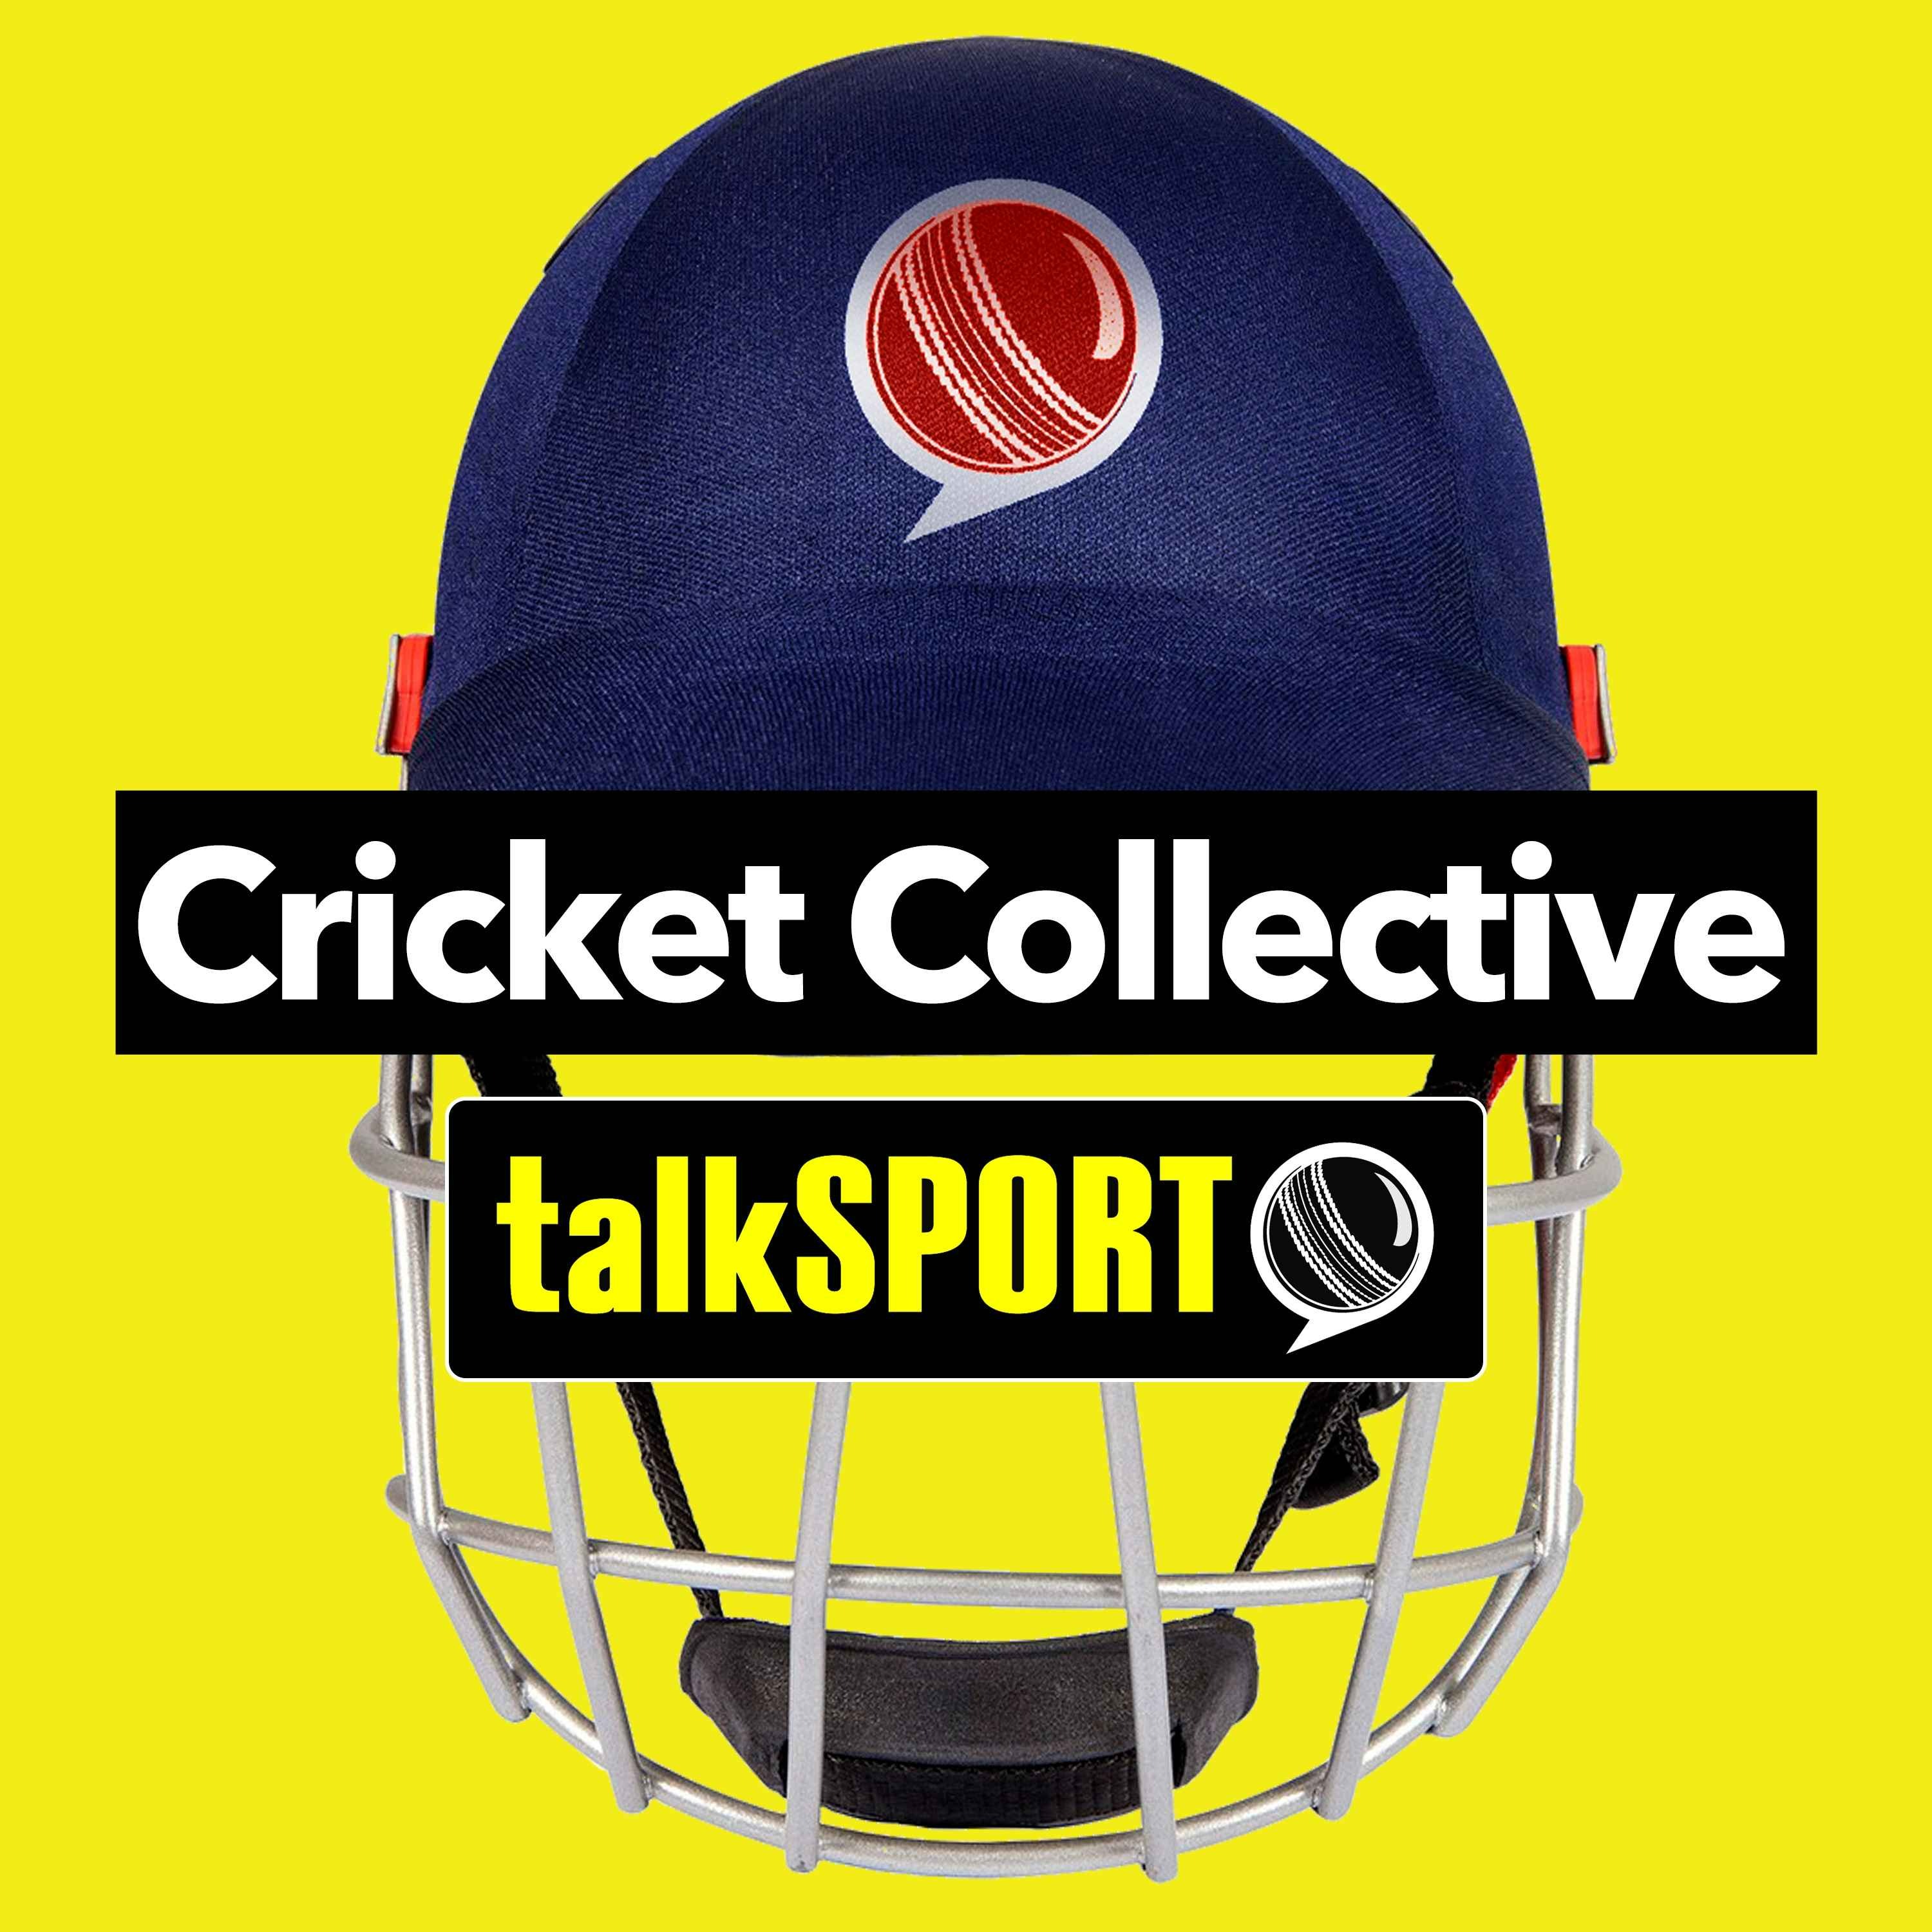 The Cricket Collective - Leicestershire's Historic Win & Kyle Abbott On Hampshire's Title Hopes